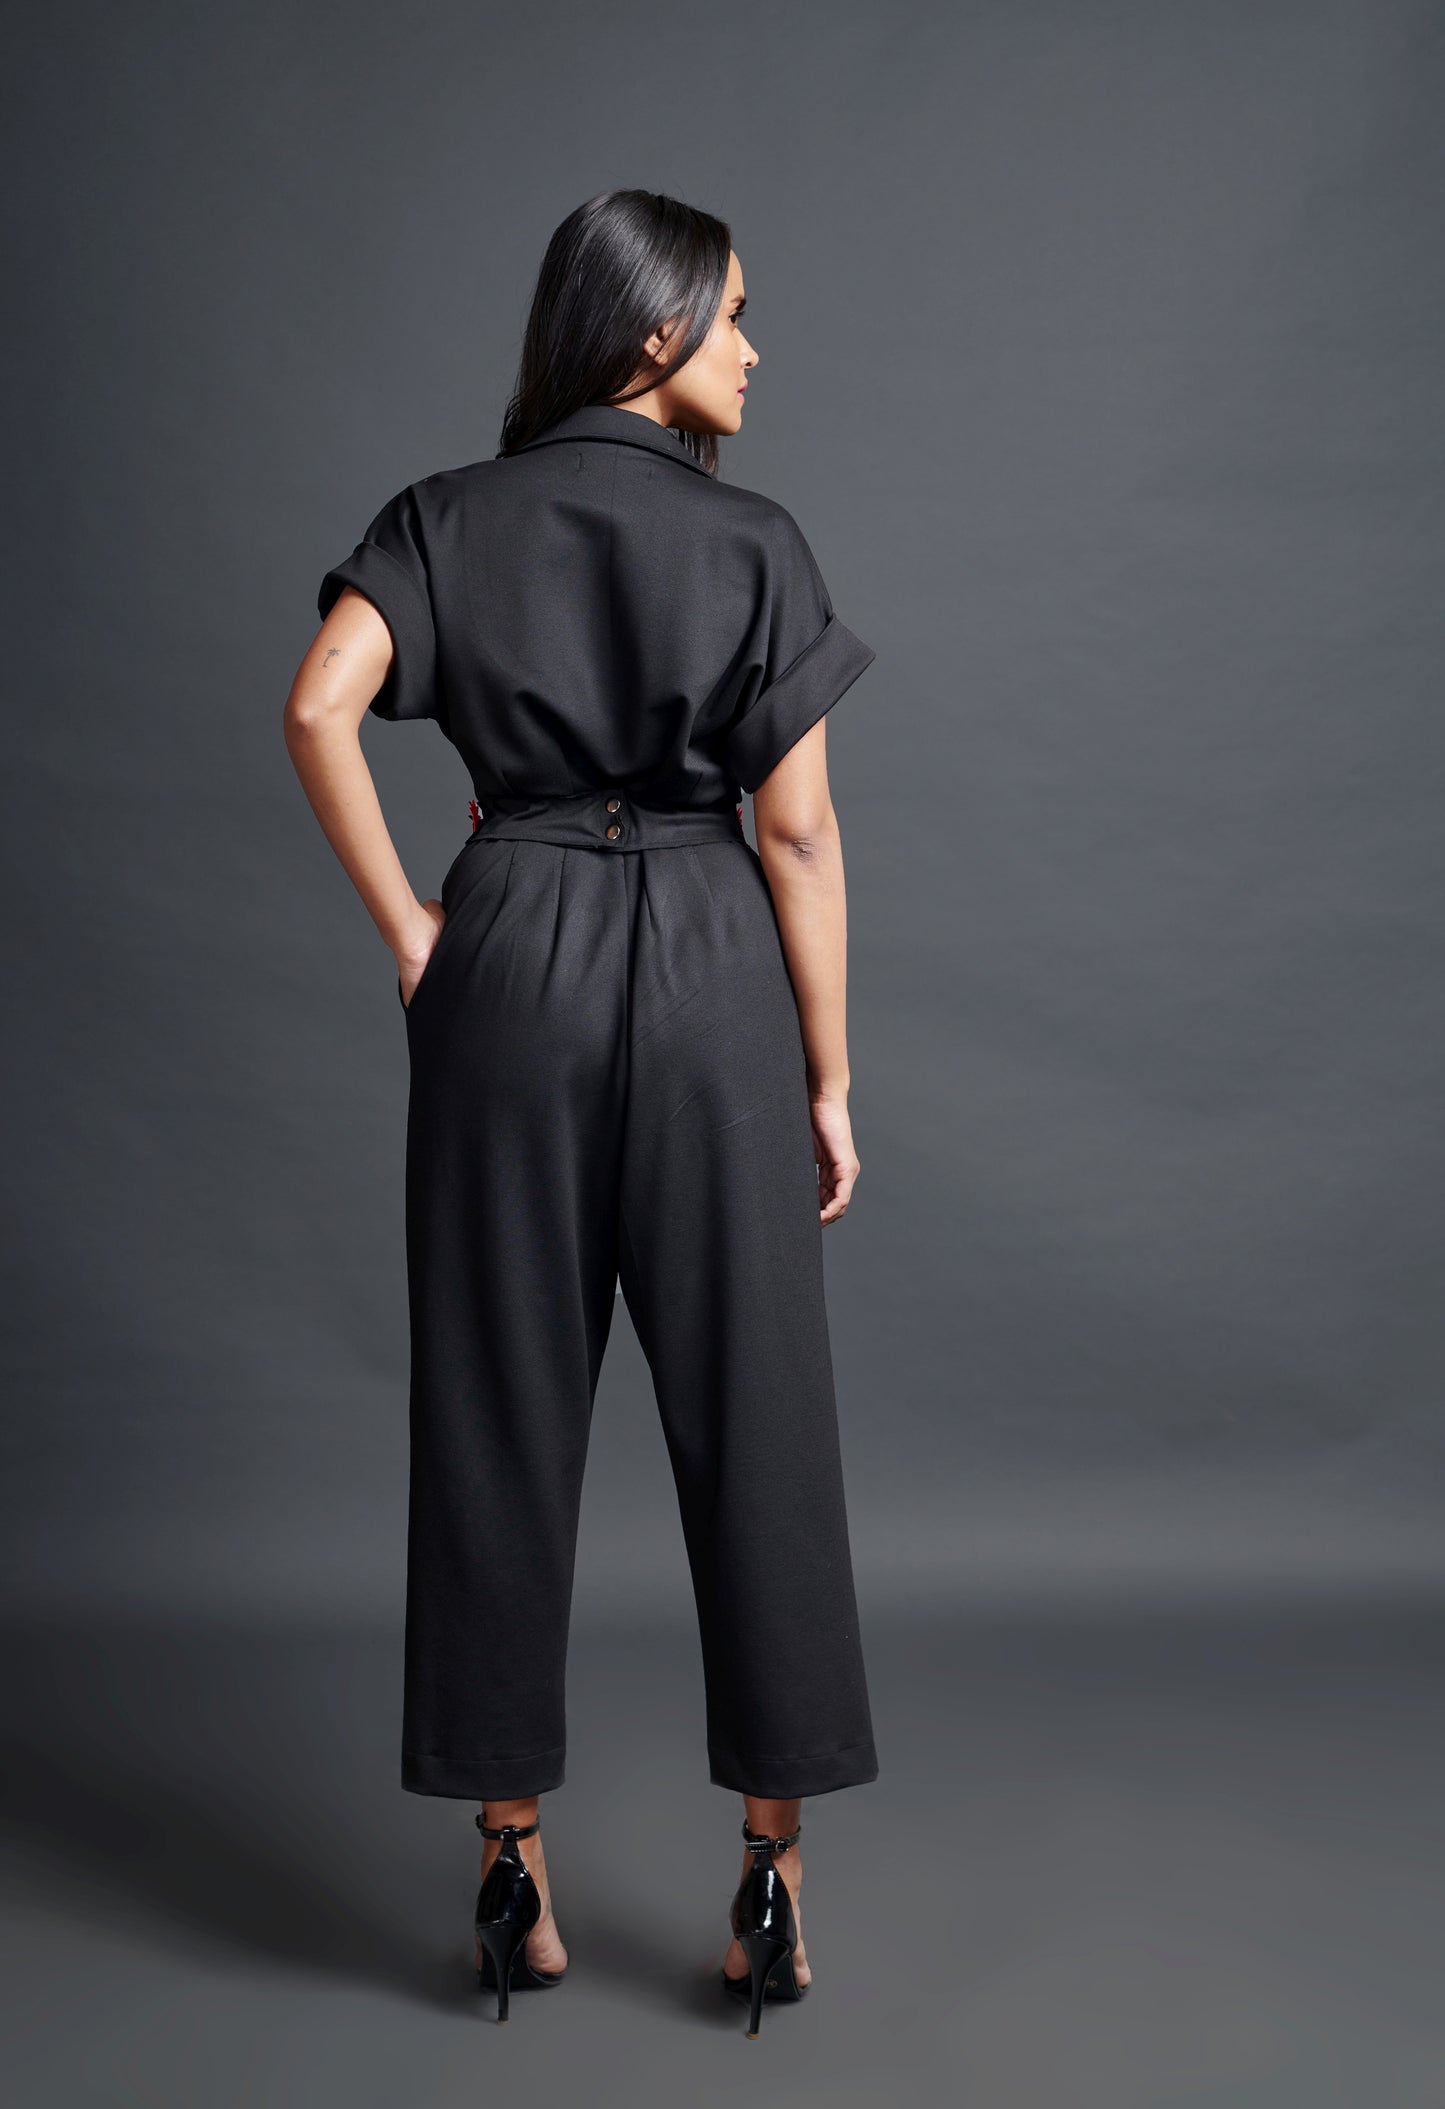 Image of BLACK COLLARED JUMPSUIT WITH NEION CONFETTI BELT. From savoirfashions.com